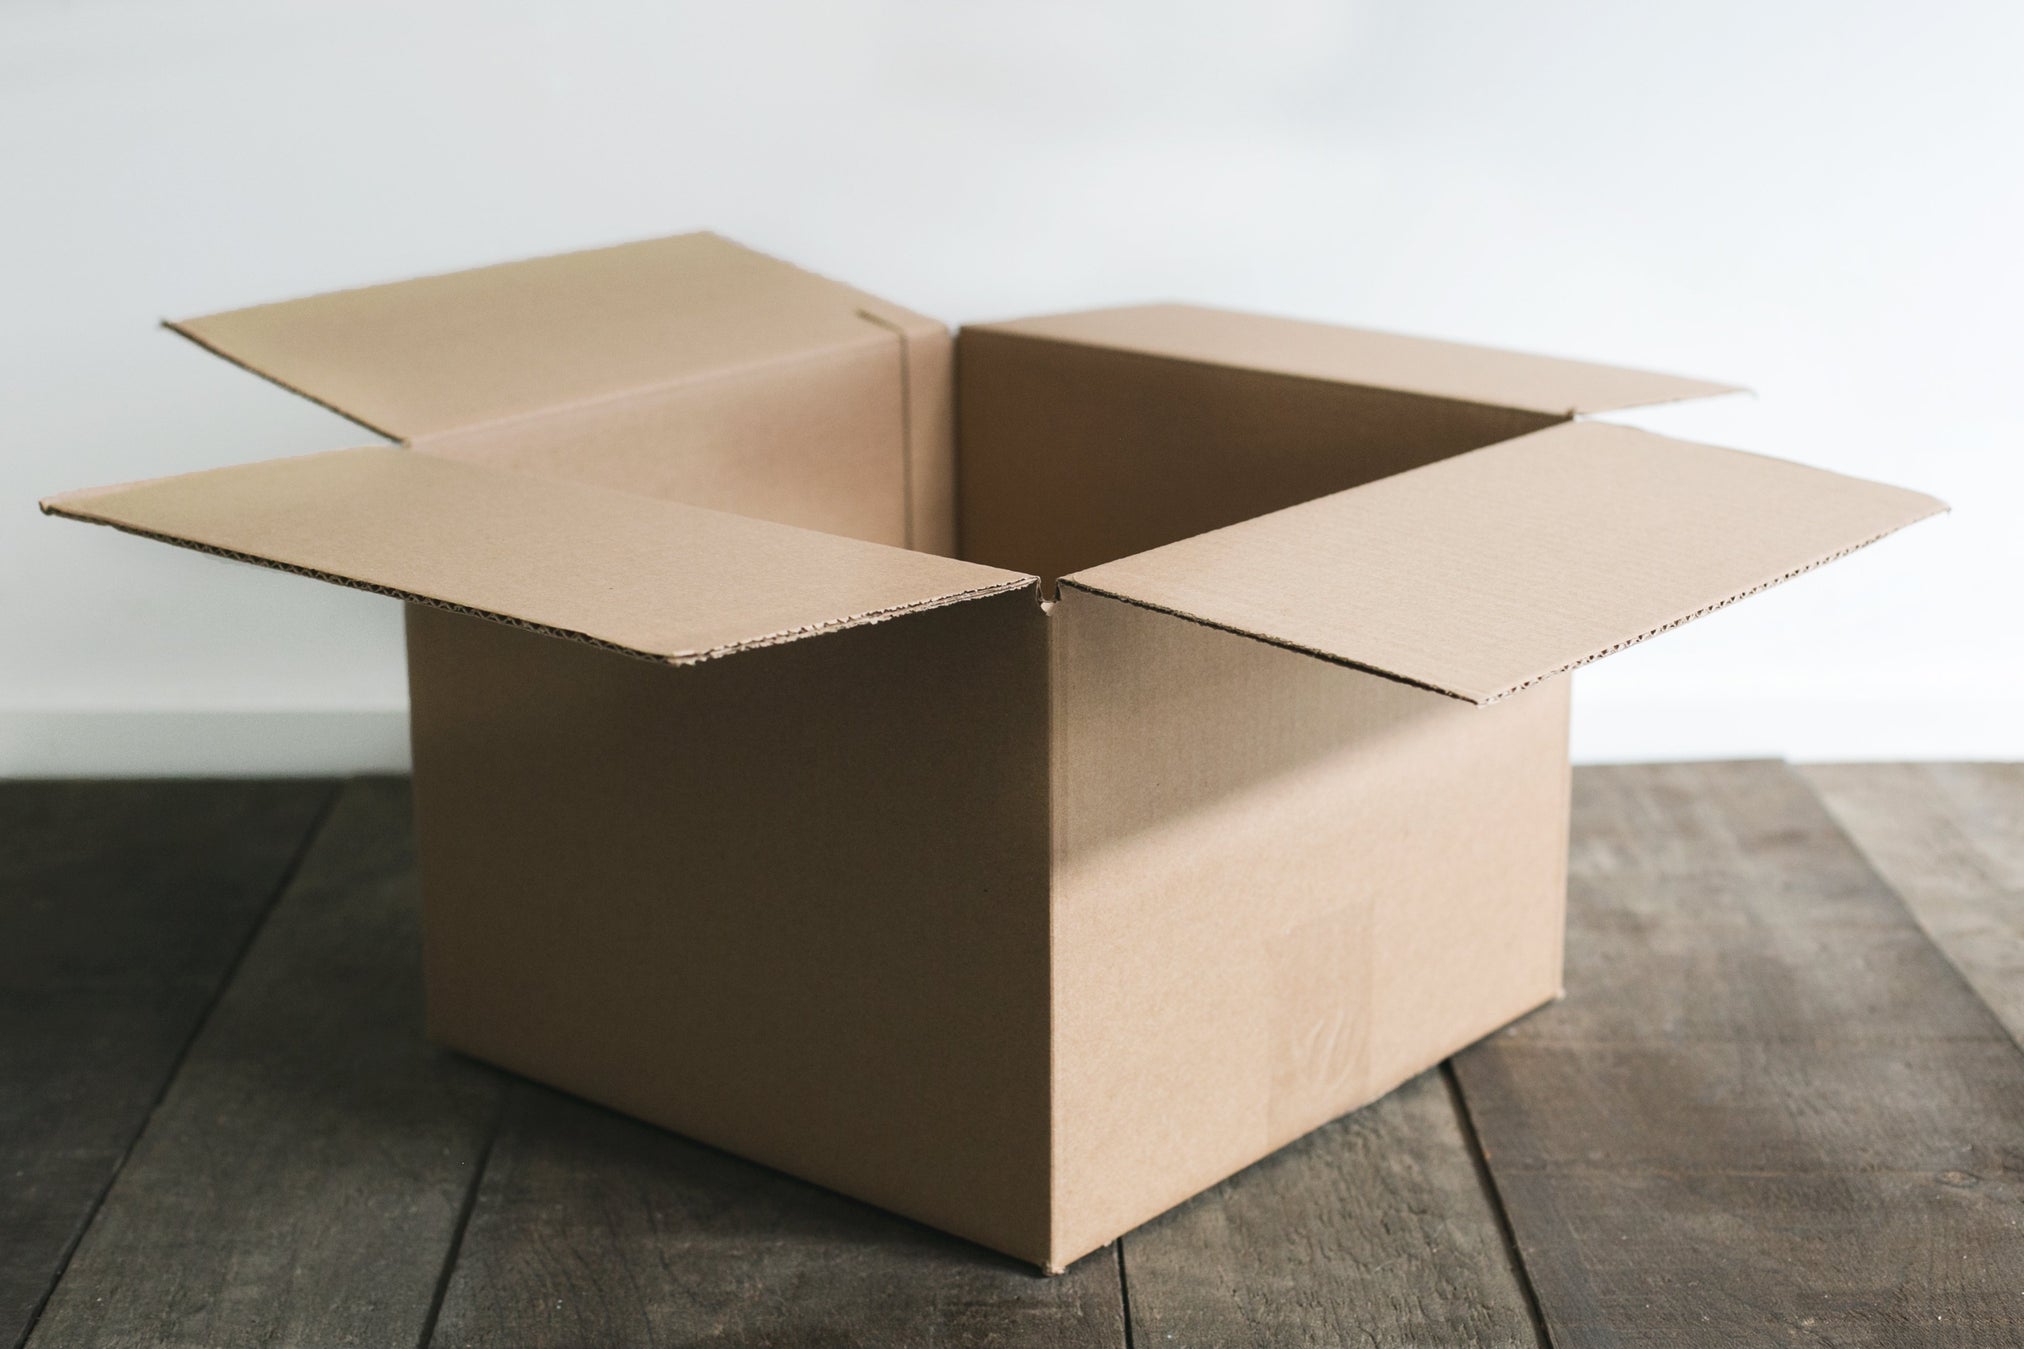 Different Styles Of Cardboard Boxes